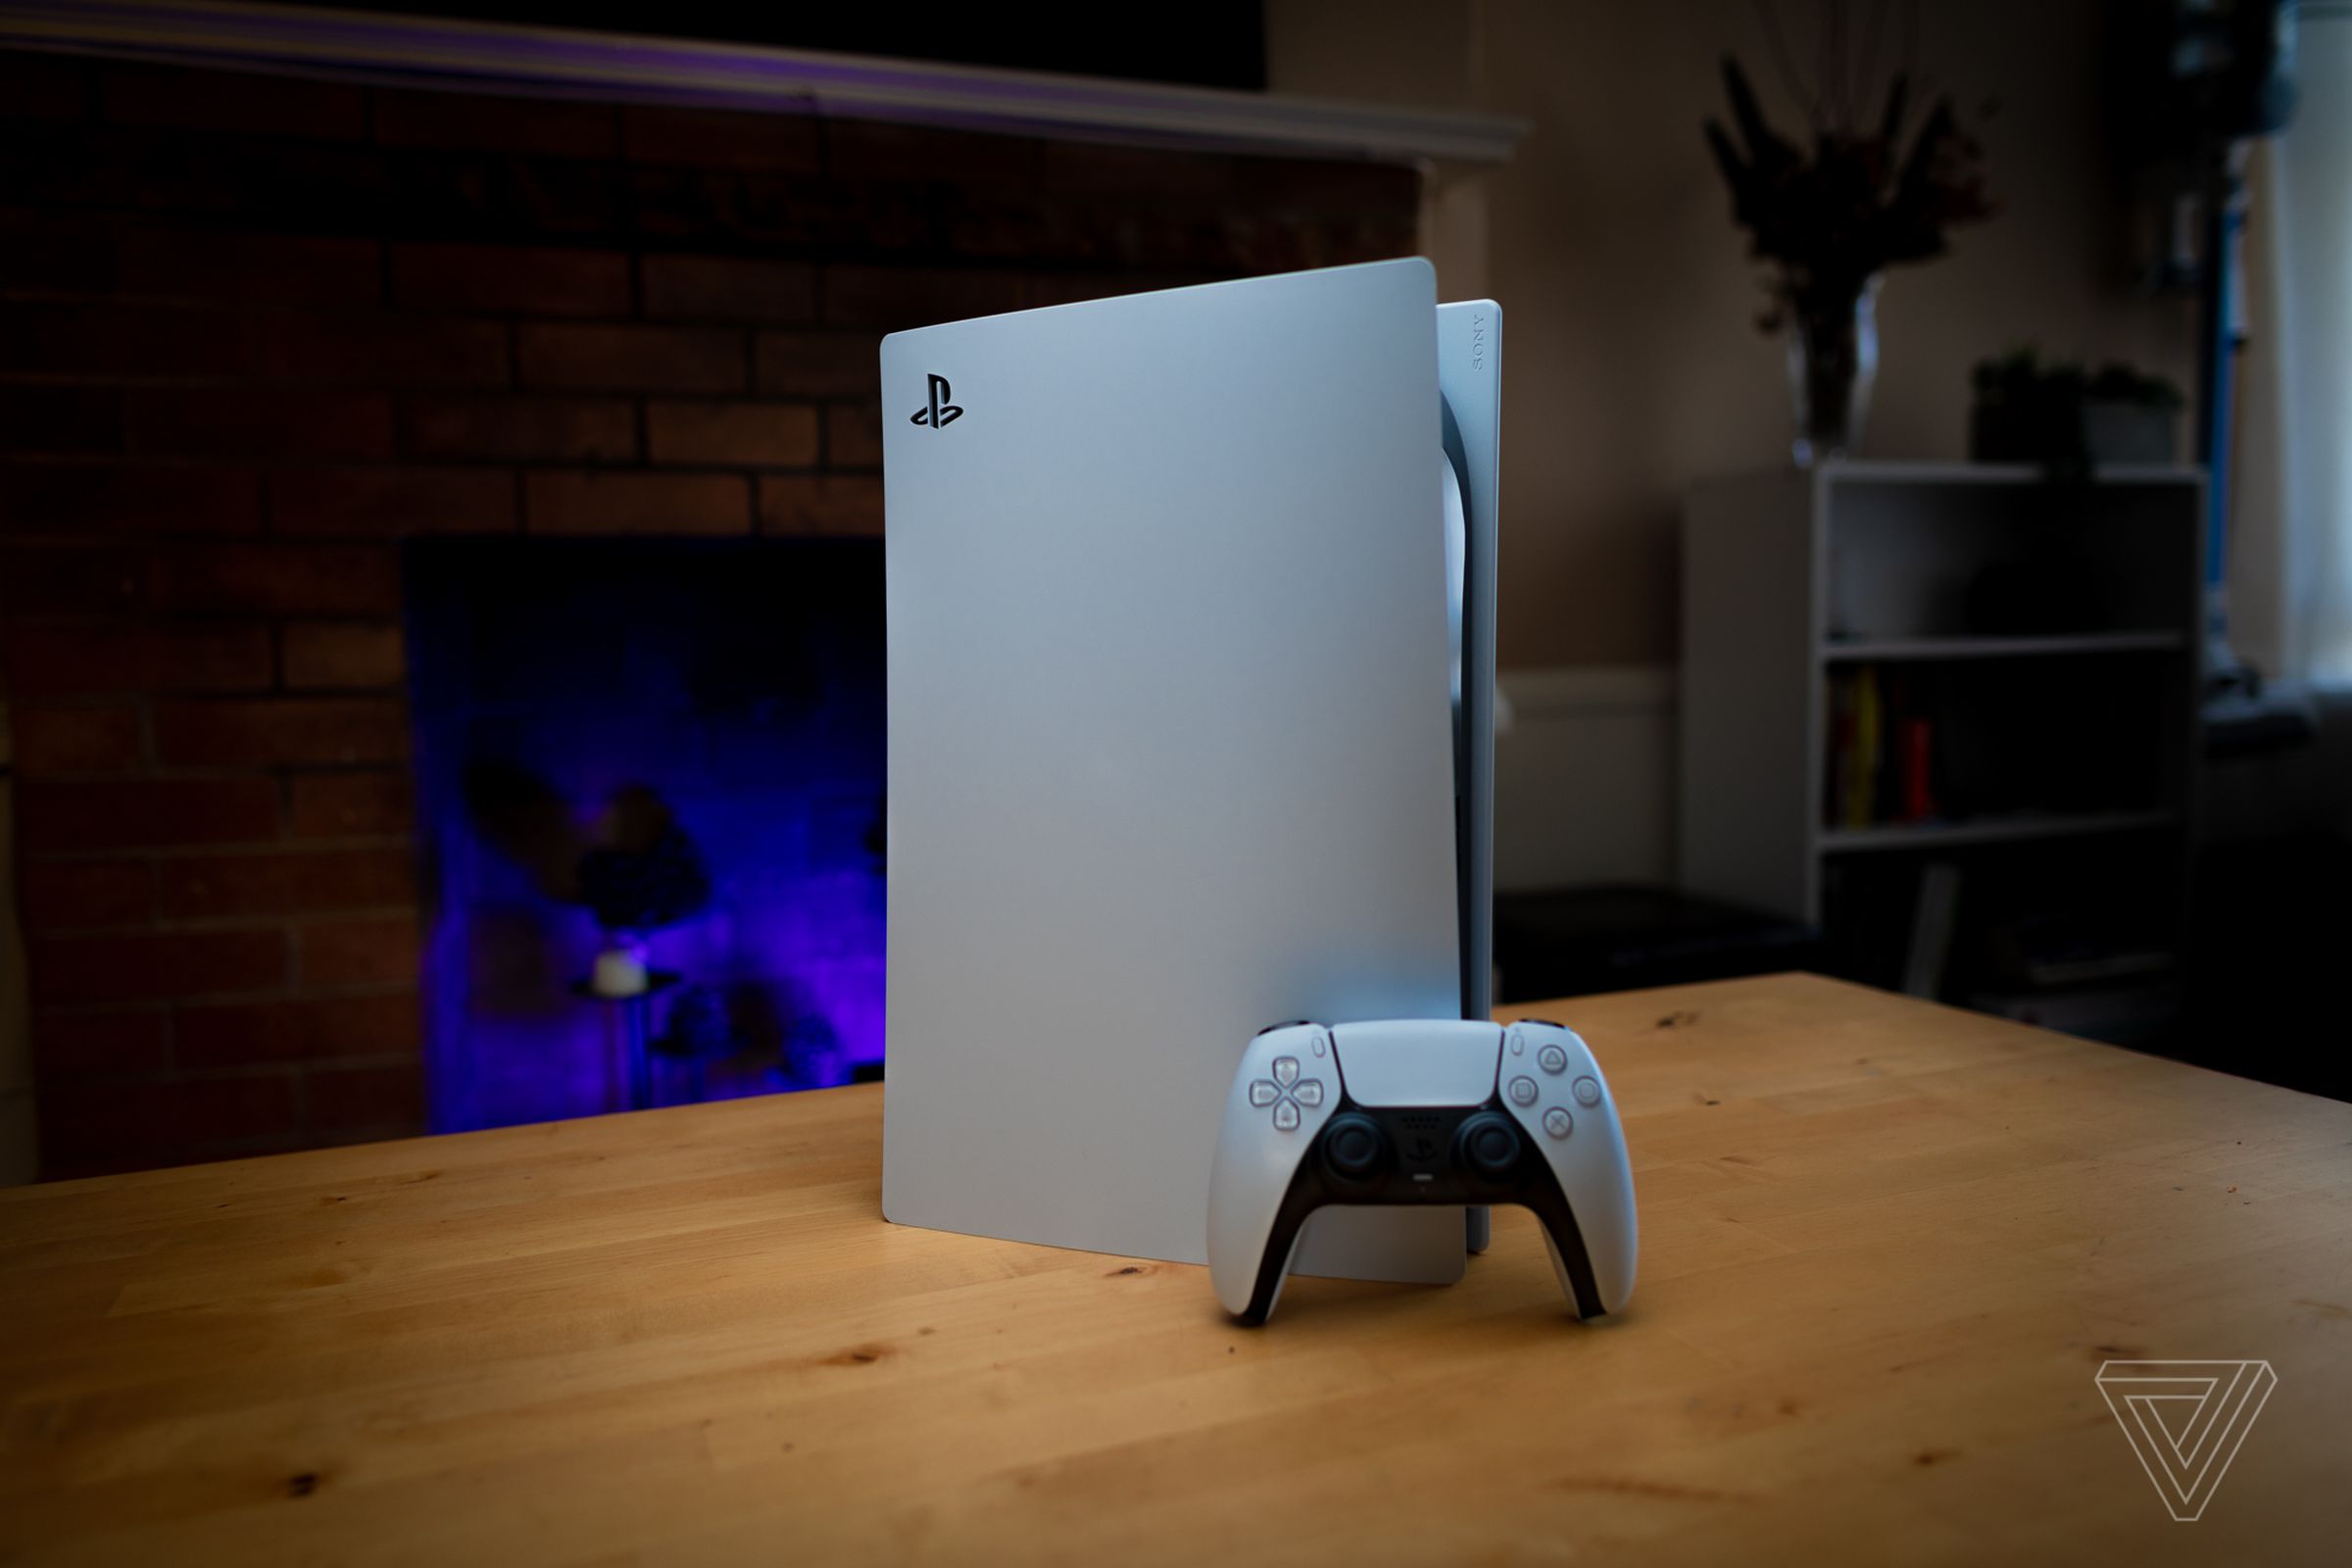 A PS5 console on a wooden table.